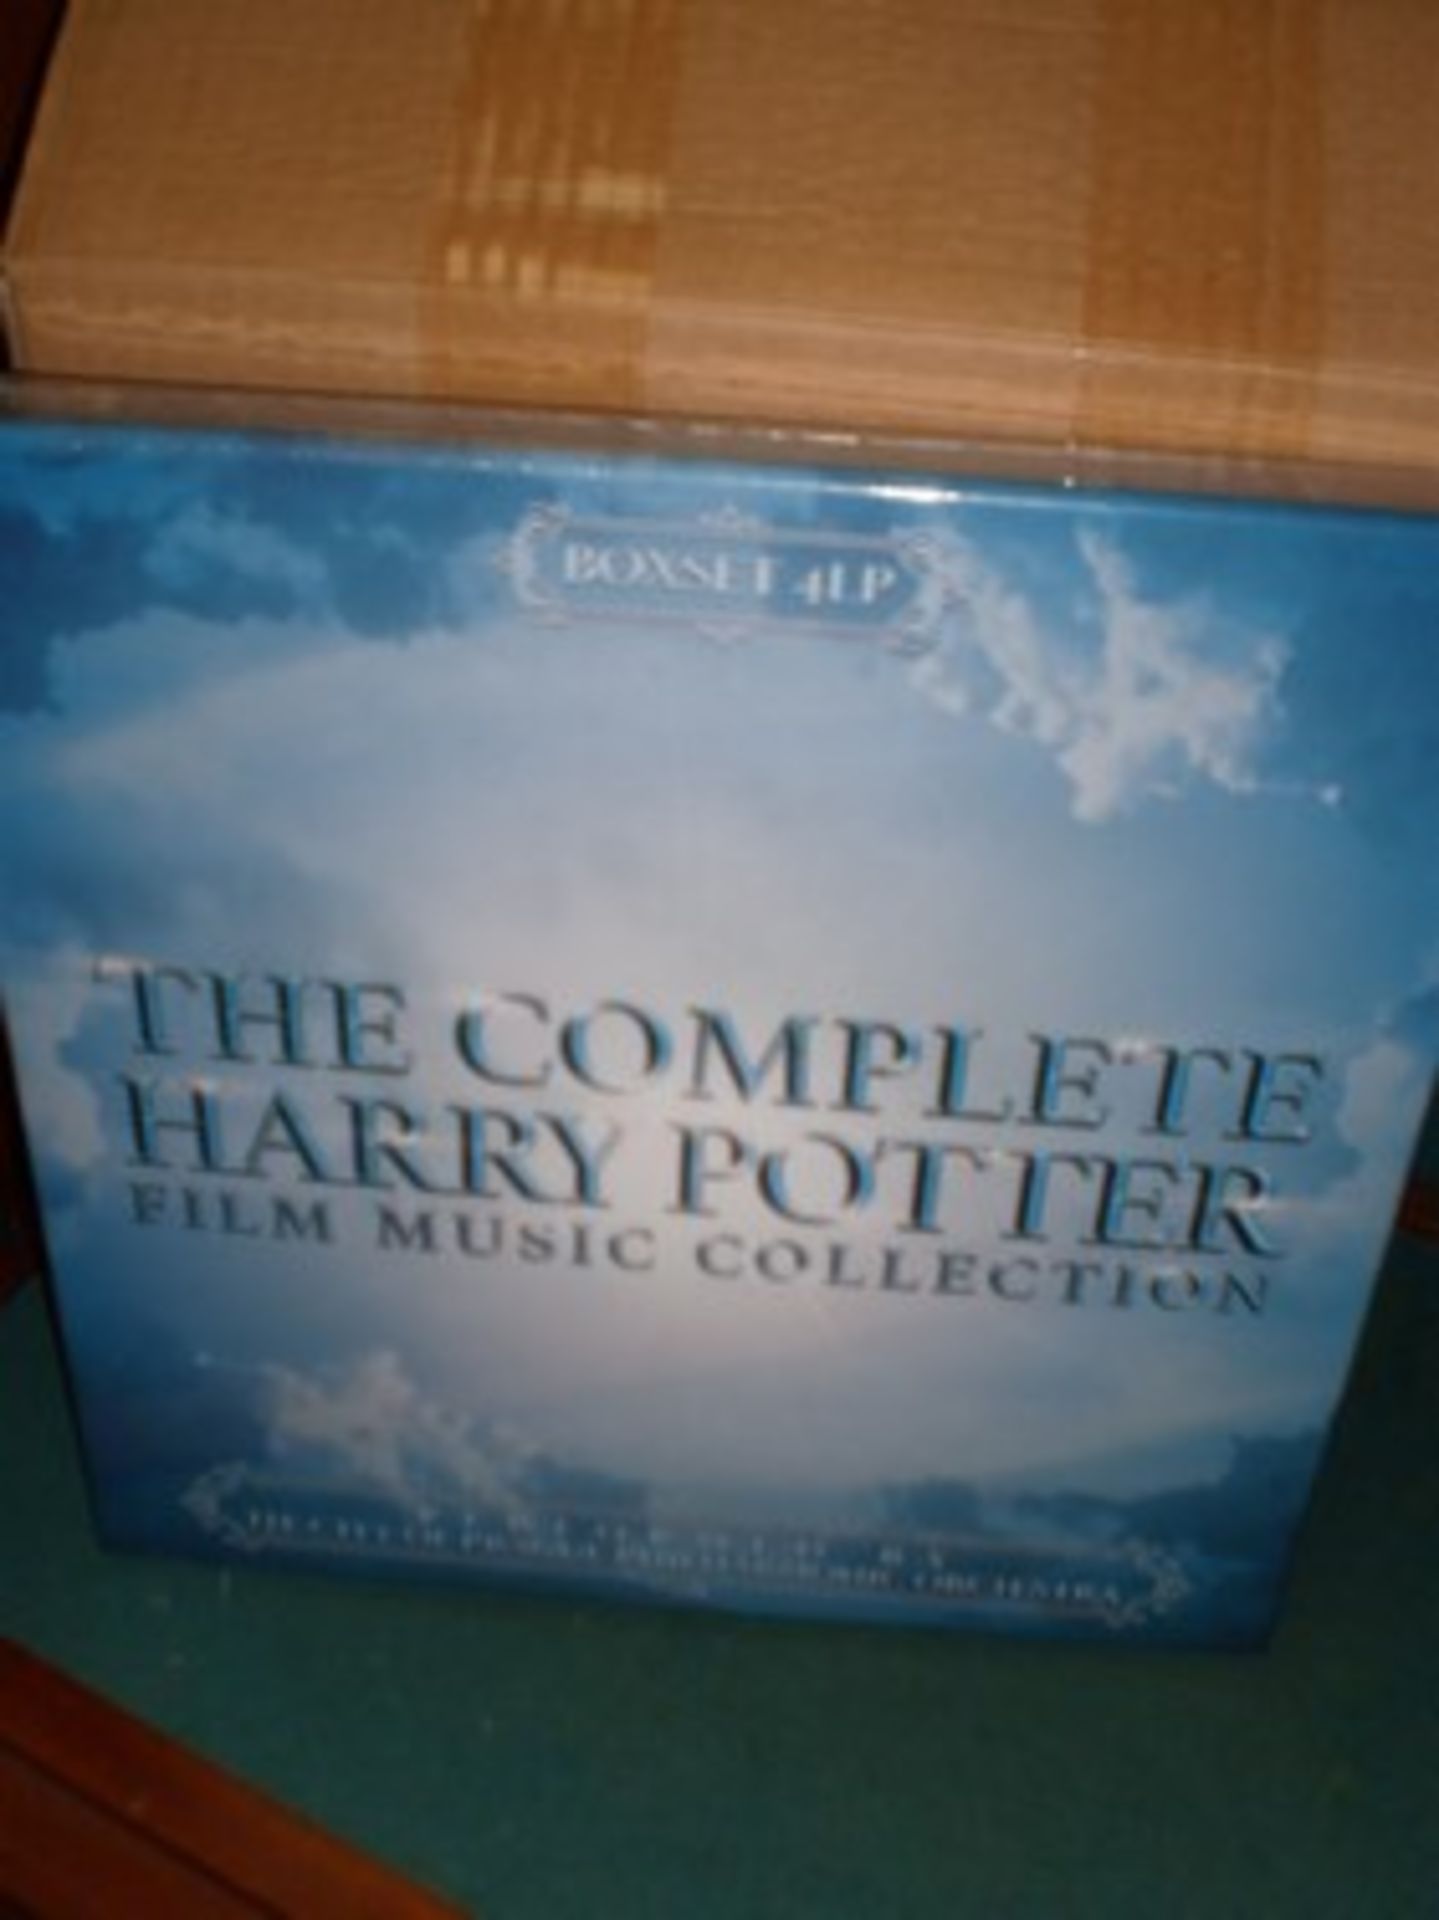 5 x The Complete Harry Potter film music collection box set - sealed new in pack (C9D)